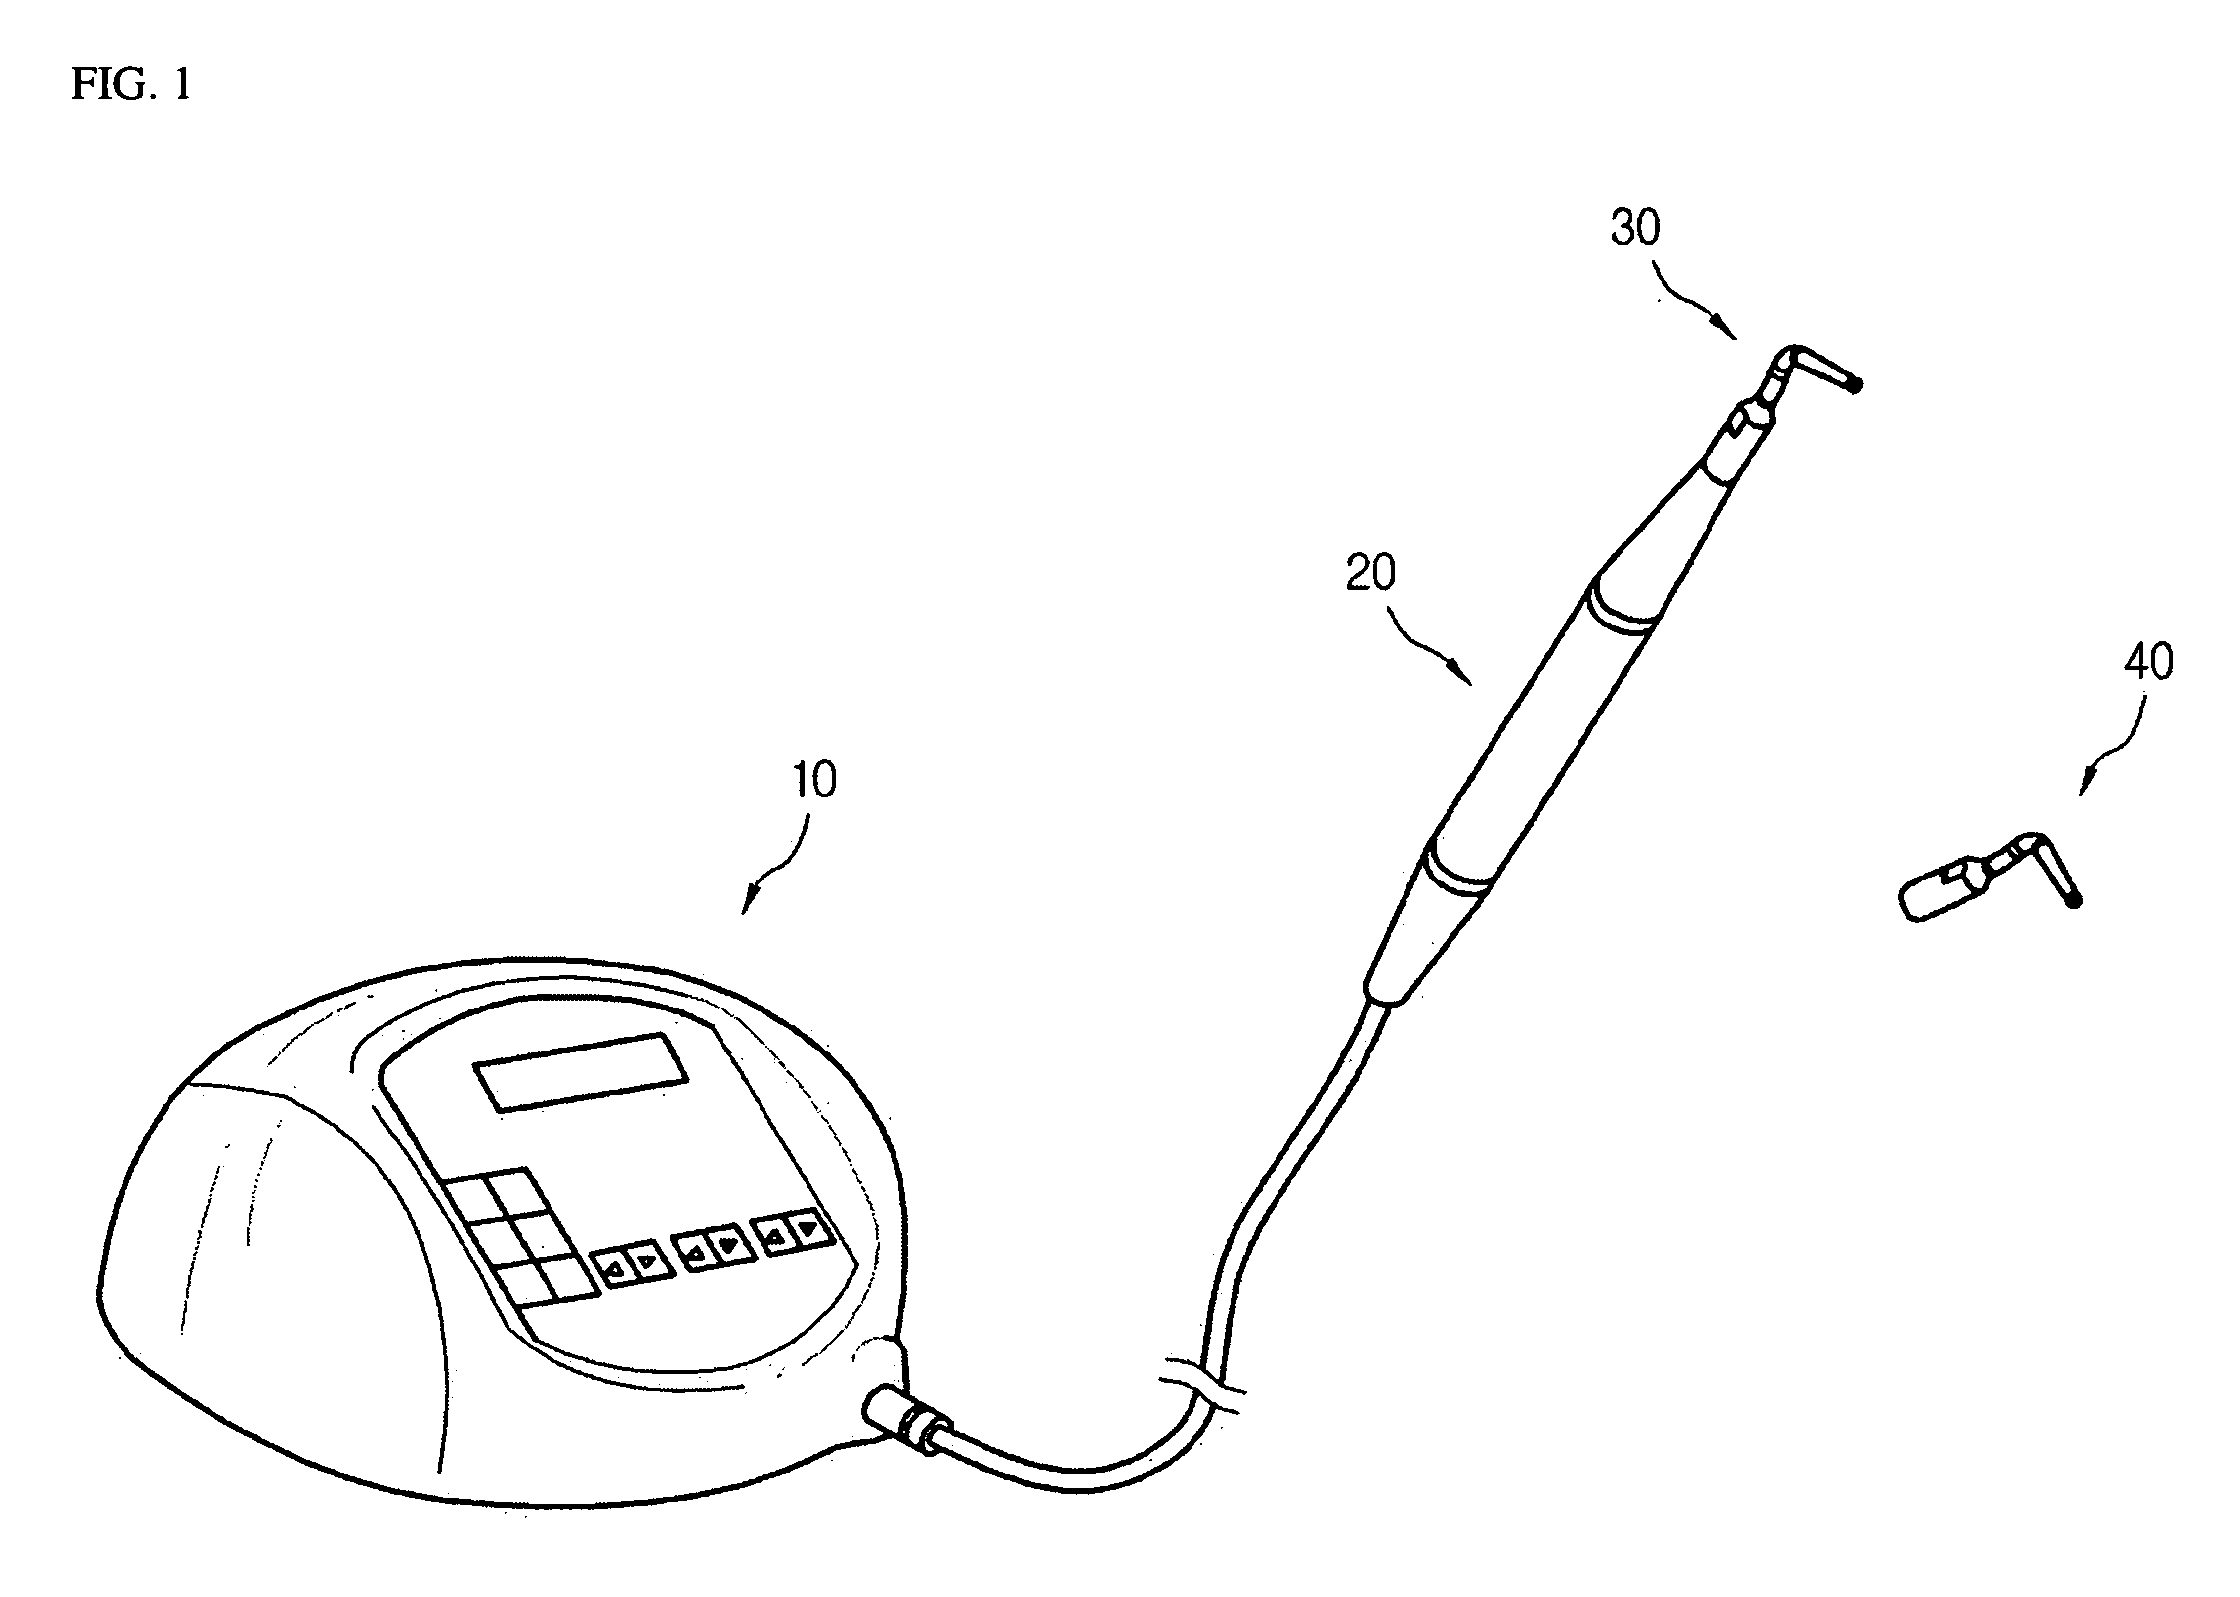 Piezo Insert and Piezo Packer for Operating an Implant Surgical Operation Using Piezoelectric Device